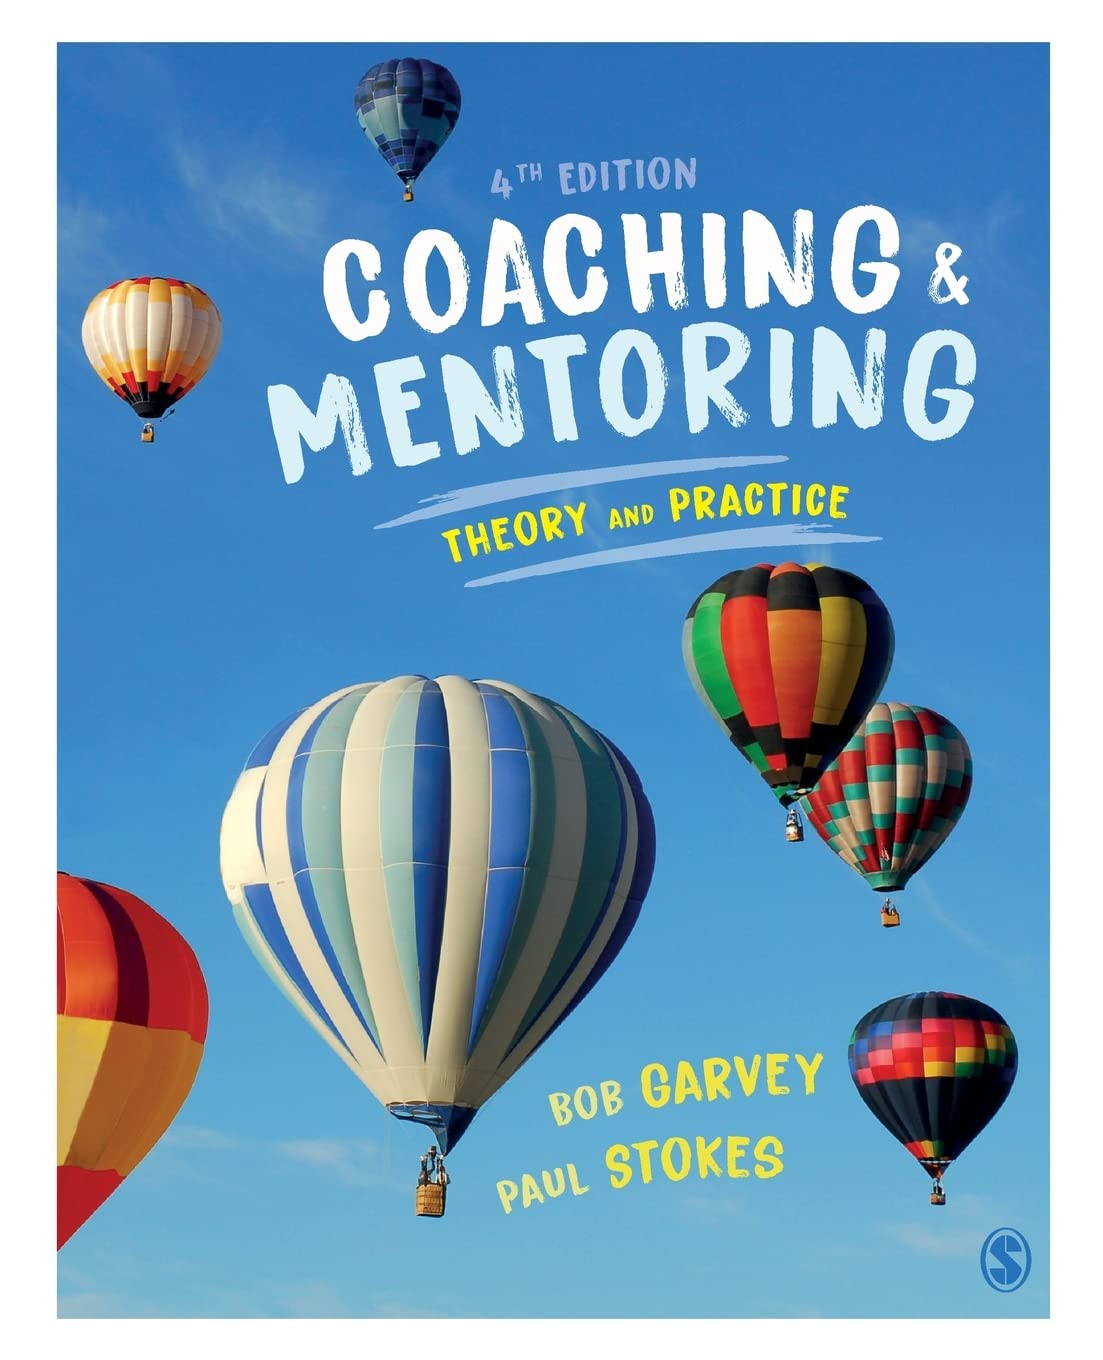 Coaching & mentoring theory and practice